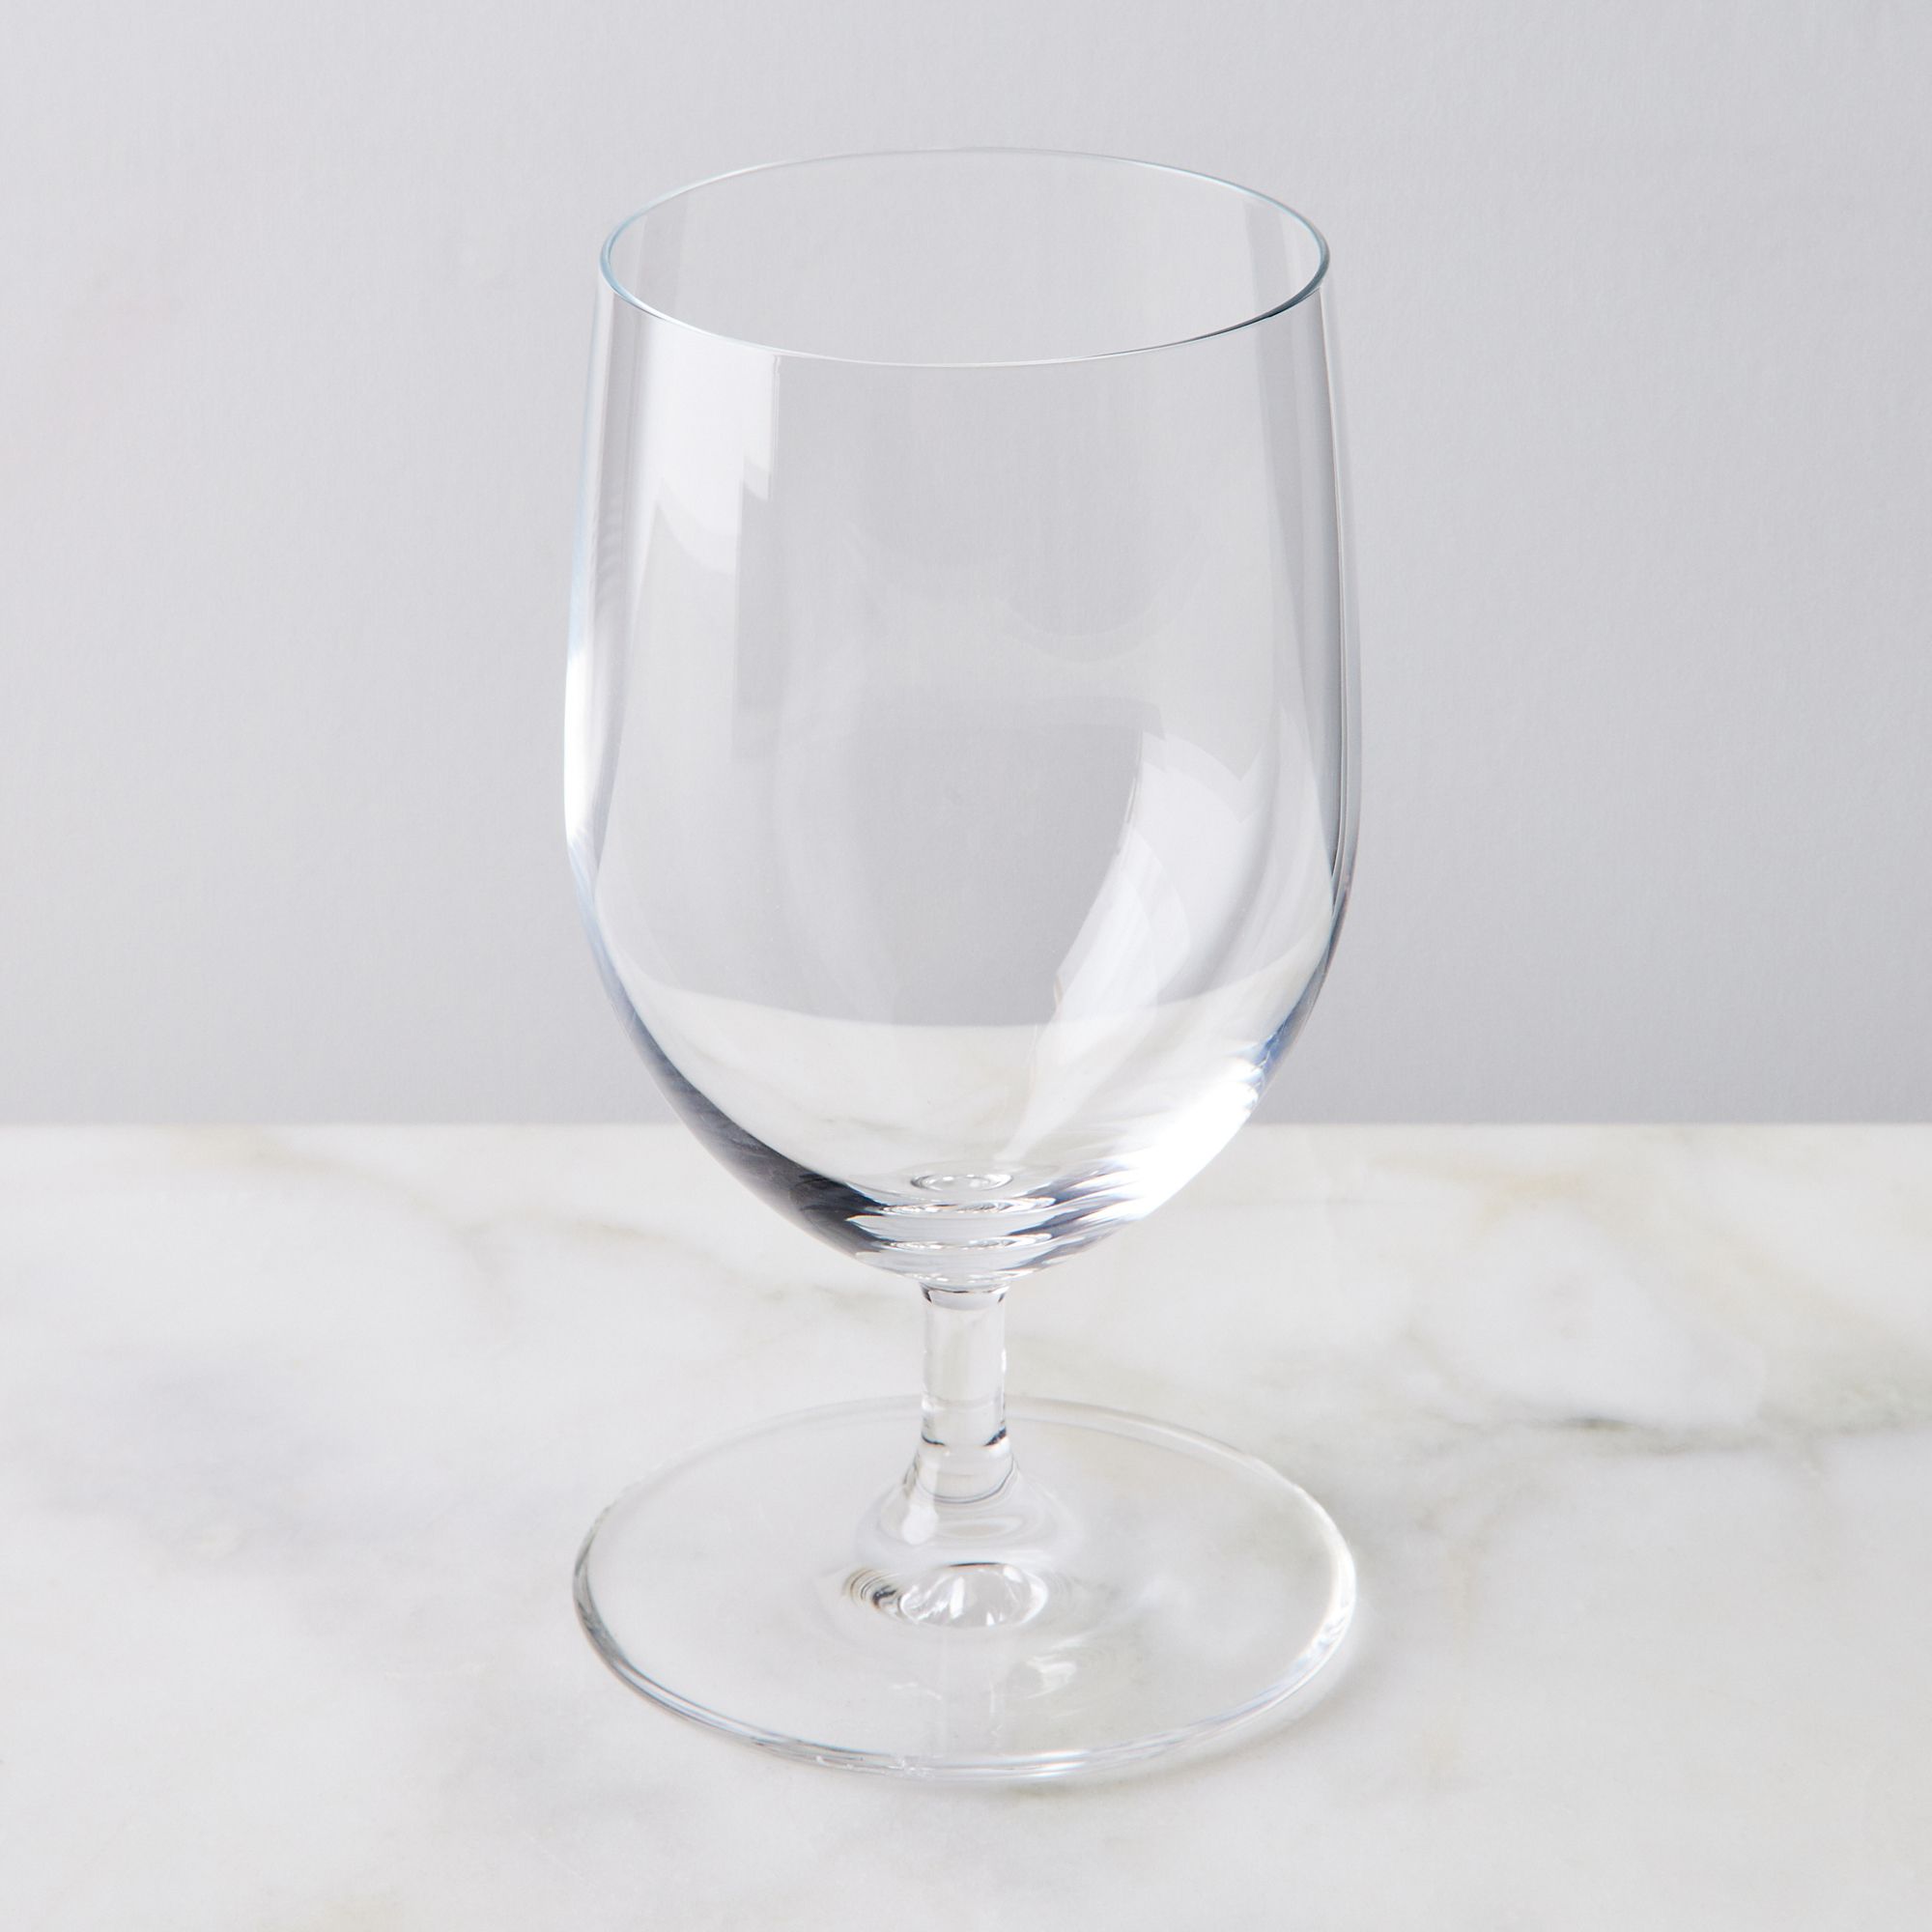 White wine or water glass